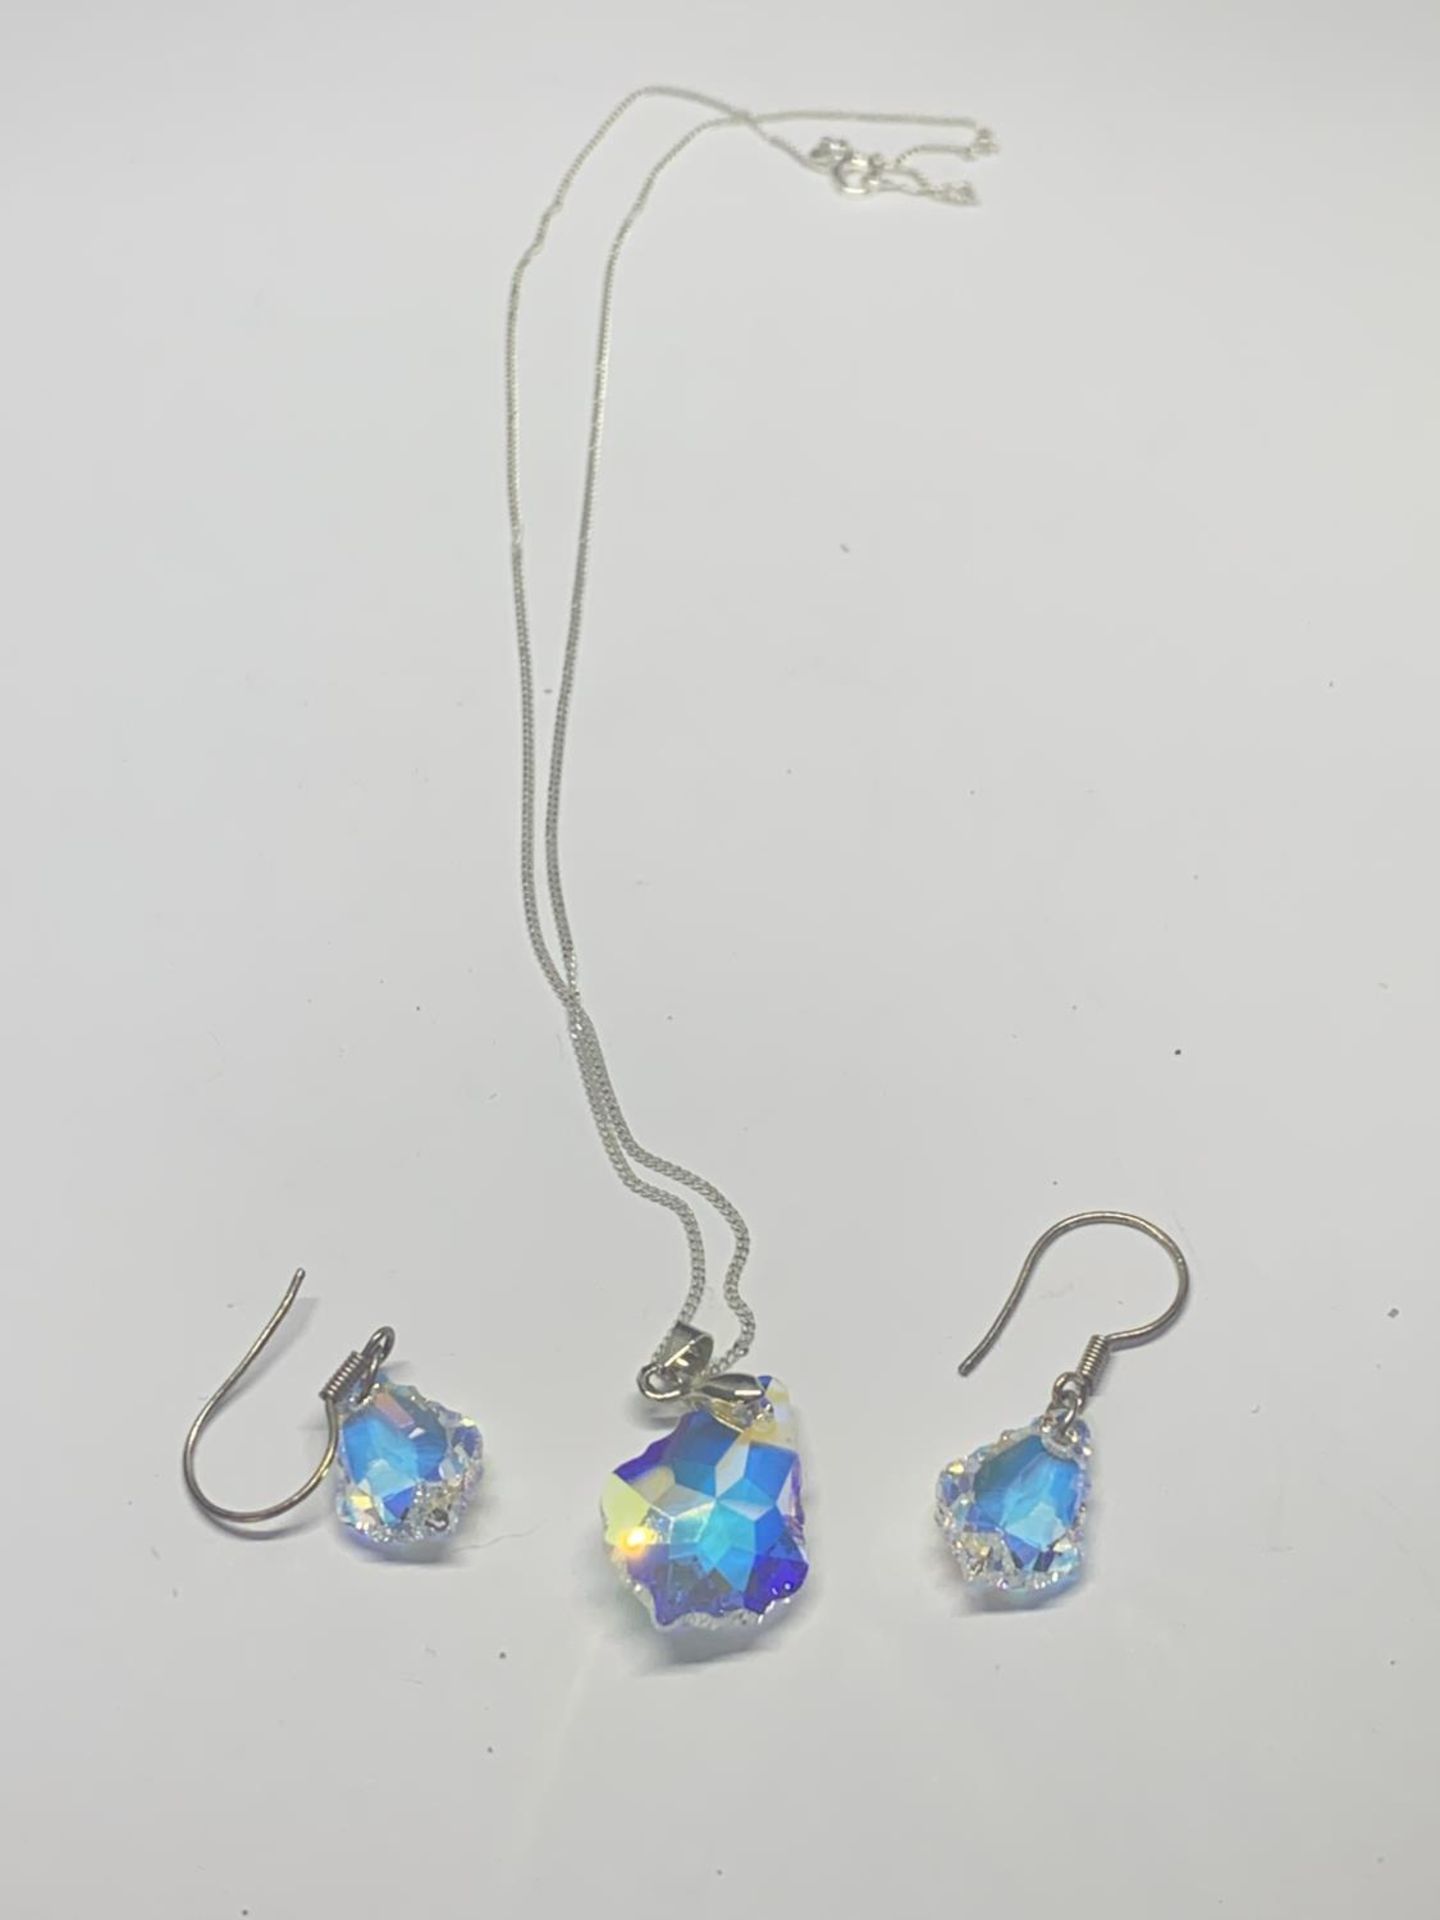 A SILVER NECKLACE AND CRYSTAL PENDANT WITH MATCHING EARRINGS IN A PRESENTATION BOX